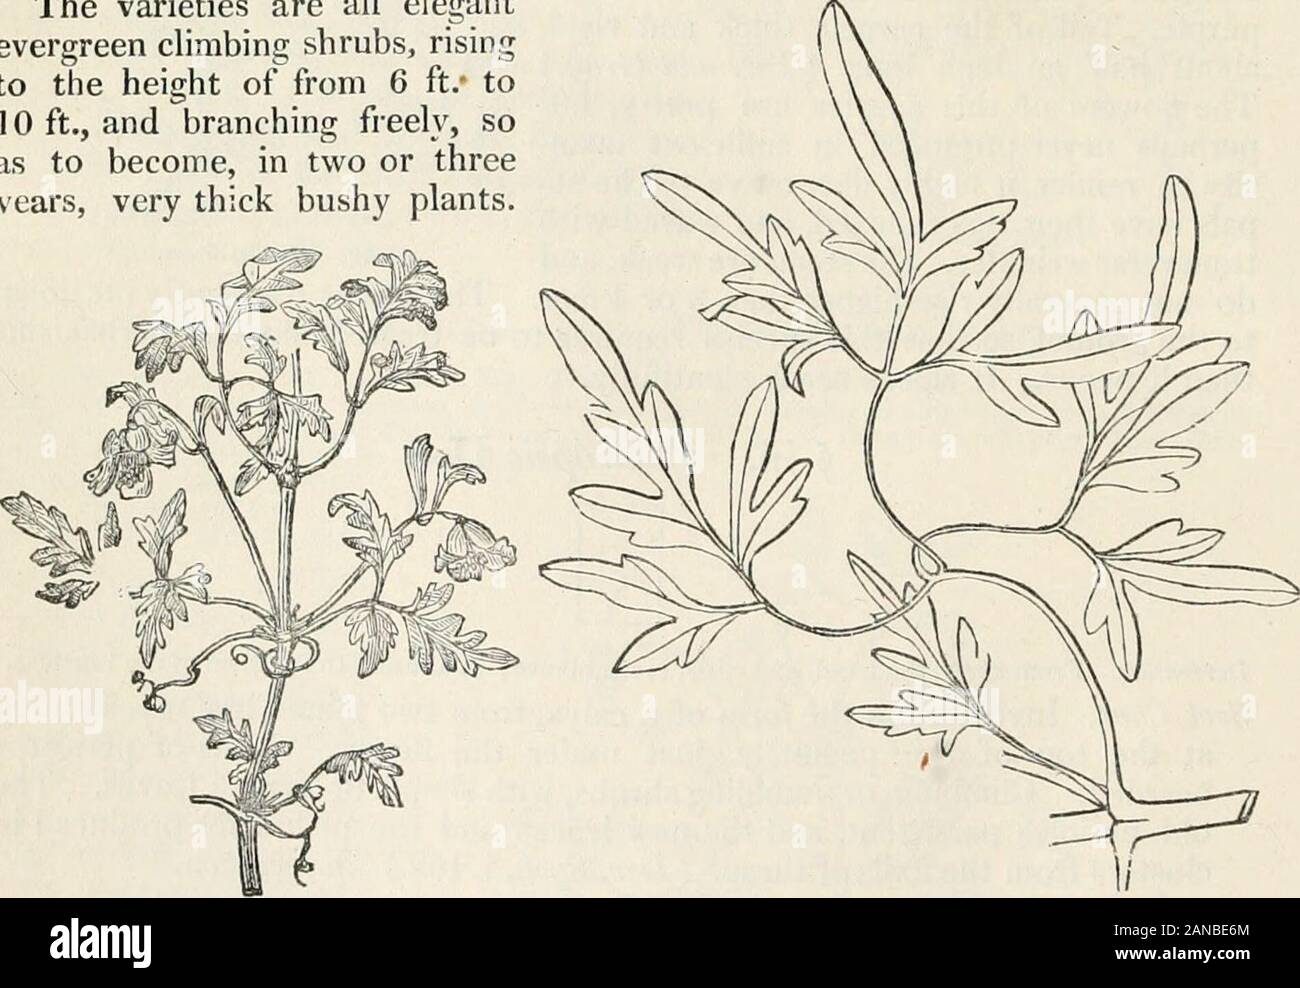 Trees and shrubs; an abridgment of the Arboretum et fruticetum britannicum: containing the hardy trees and shrubs of Britain, native and foreign, scientifically and popularly described; with their propagation, culture and uses and engravings of nearly all the species . 21. C. cirrh6sa anguslif61ia SO. Clematis cirrh6sapedicelliita.. 22. Clematis cirrhosa angustif61ia. 23. Clematis cirrhosa an^sUfolia, The leaves vary from simple to ternate ; and from being entire to beingdeeply cut. The flowers appear at the end of December, or the beginningof January, and continue till the middle or end of Ap Stock Photo